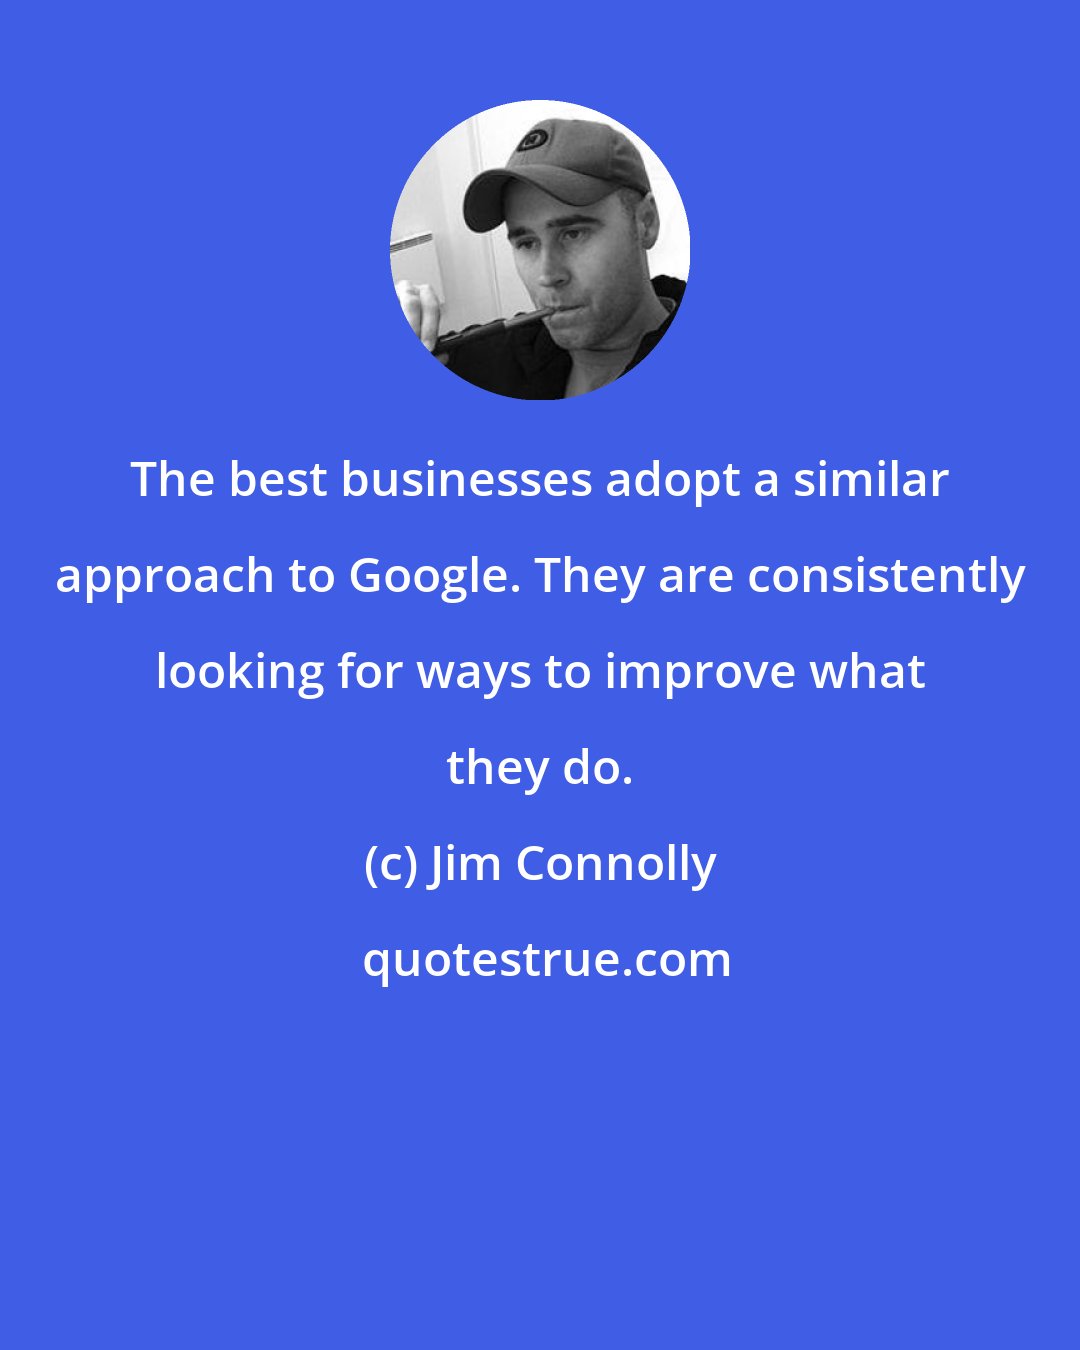 Jim Connolly: The best businesses adopt a similar approach to Google. They are consistently looking for ways to improve what they do.